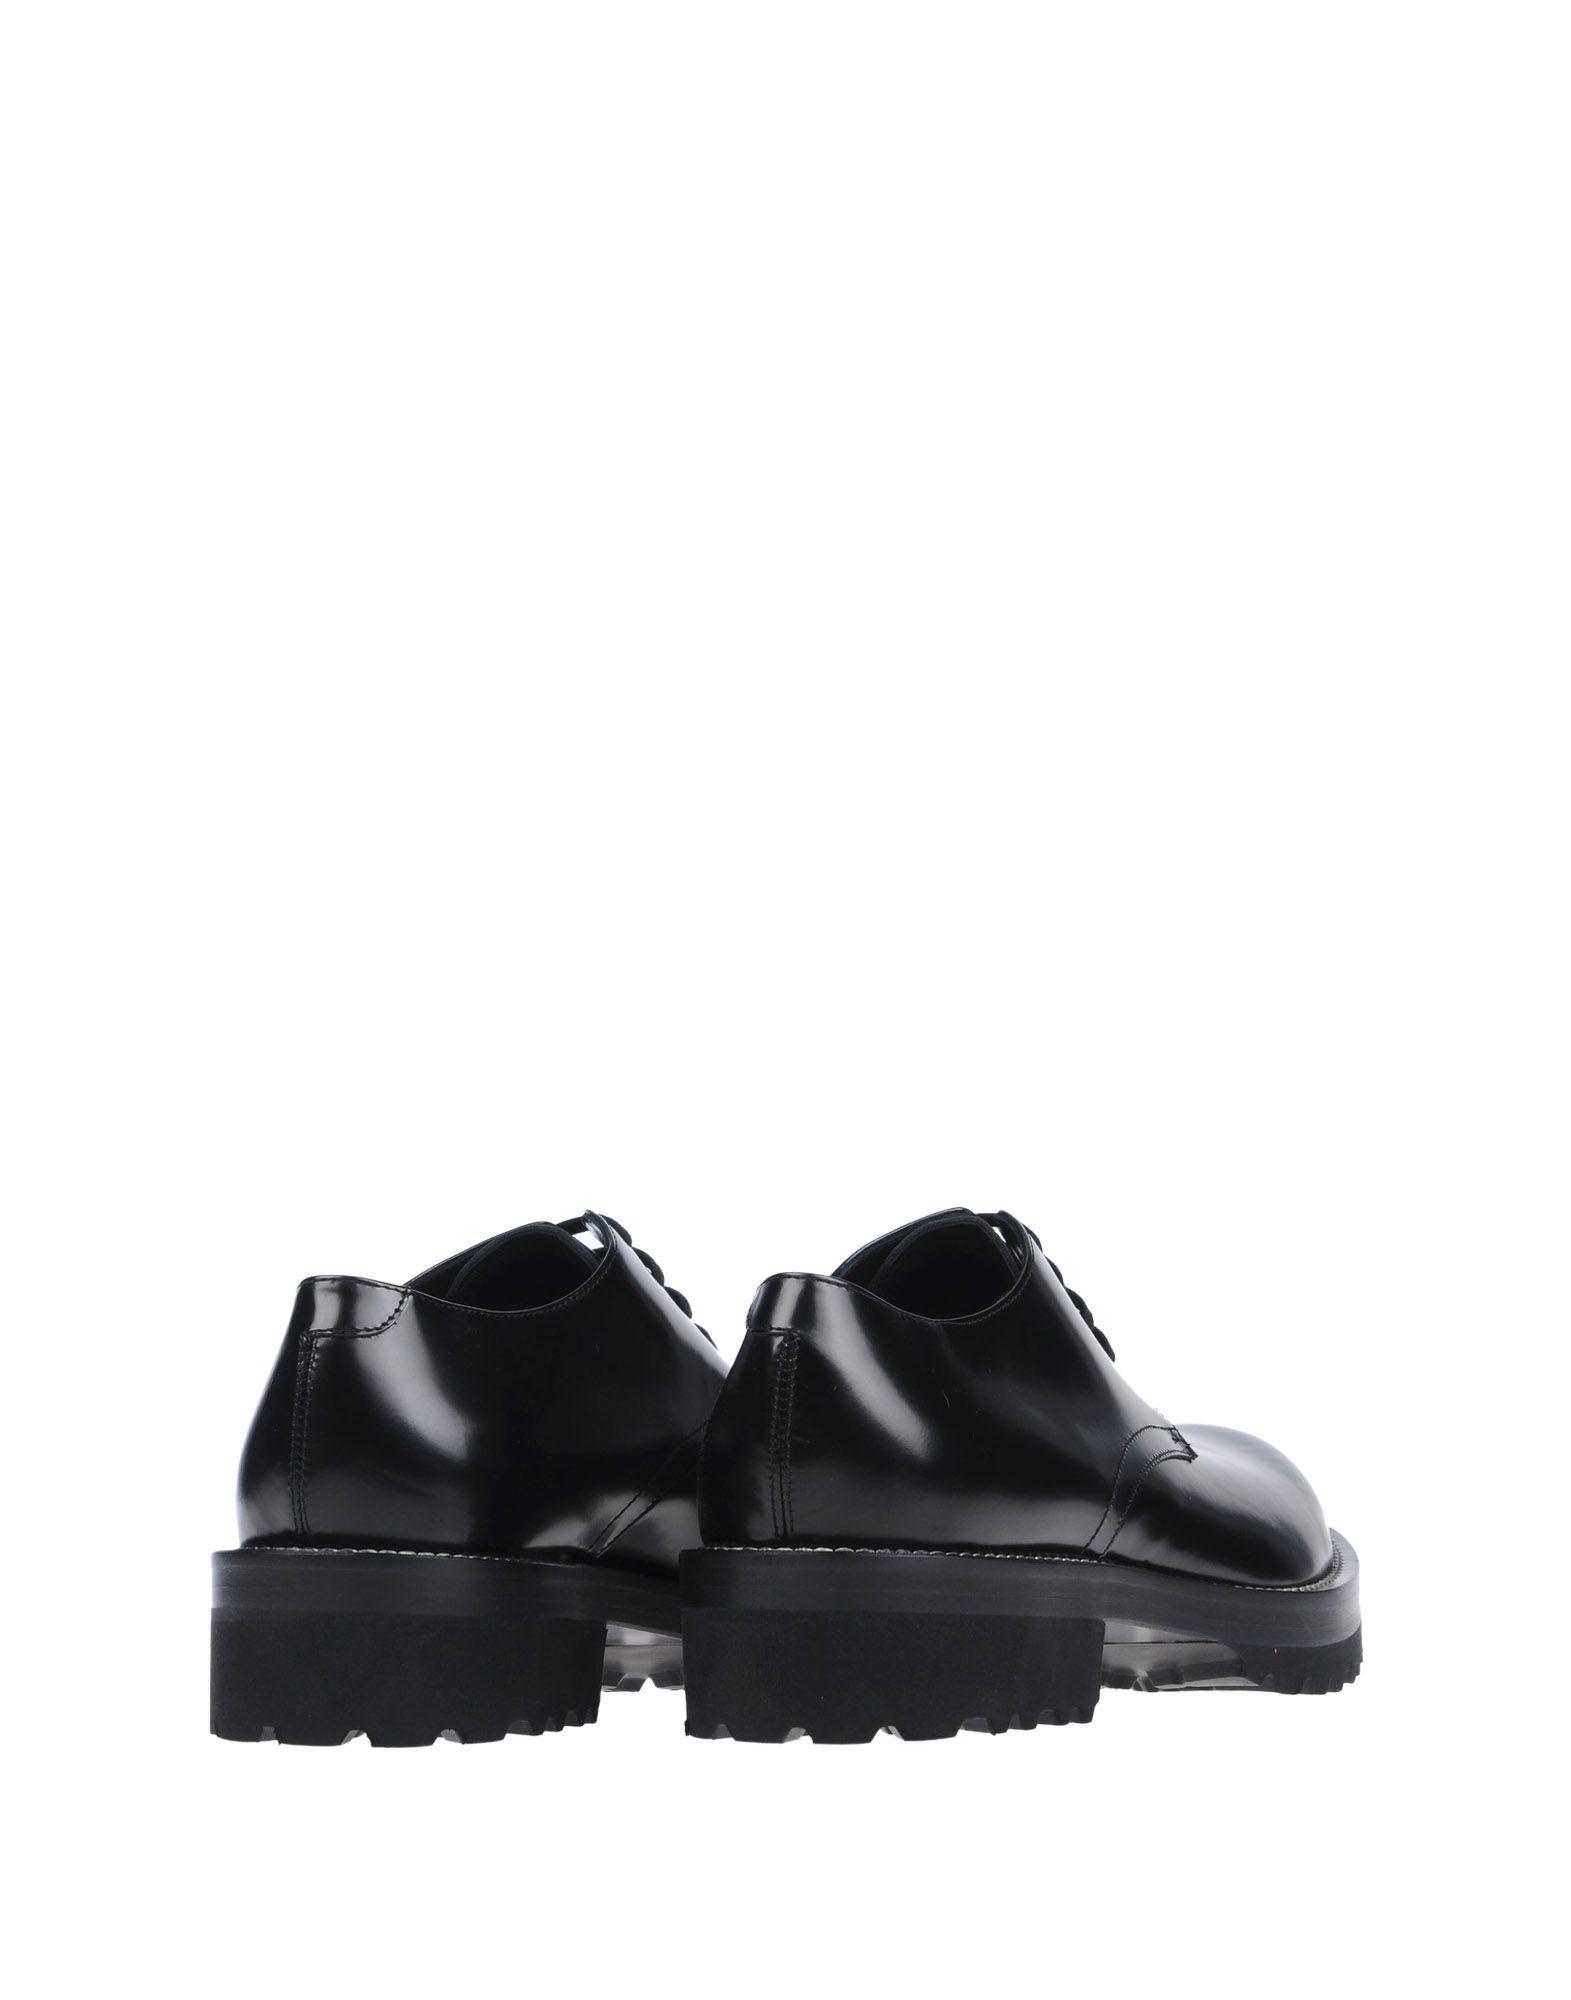 Lyst - Marni Lace-up Shoe in Black for Men